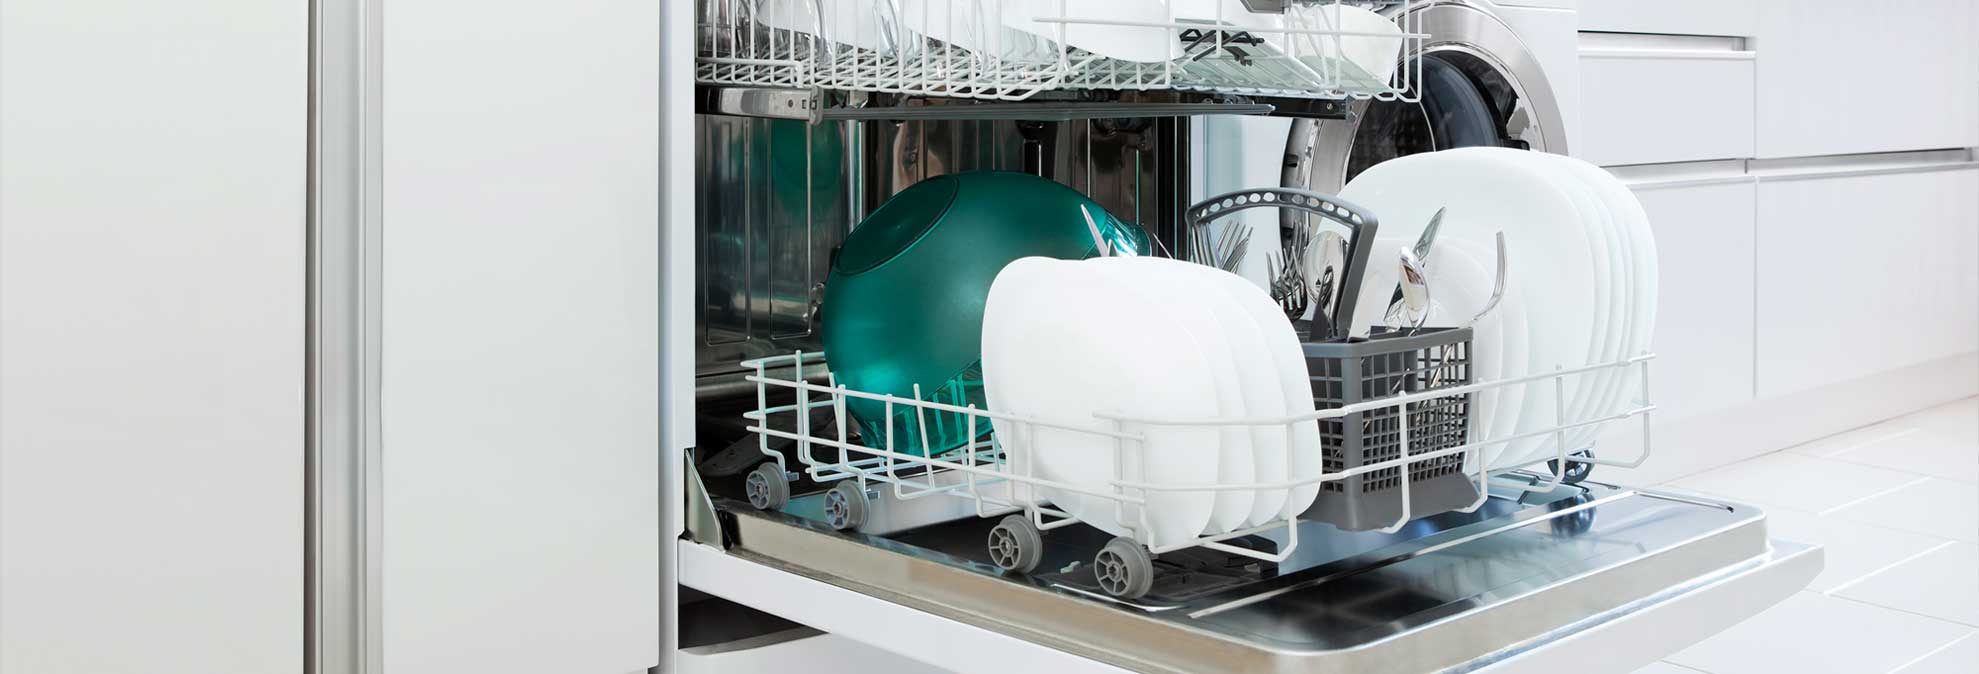 Best Dishwasher Buying Guide Consumer Reports